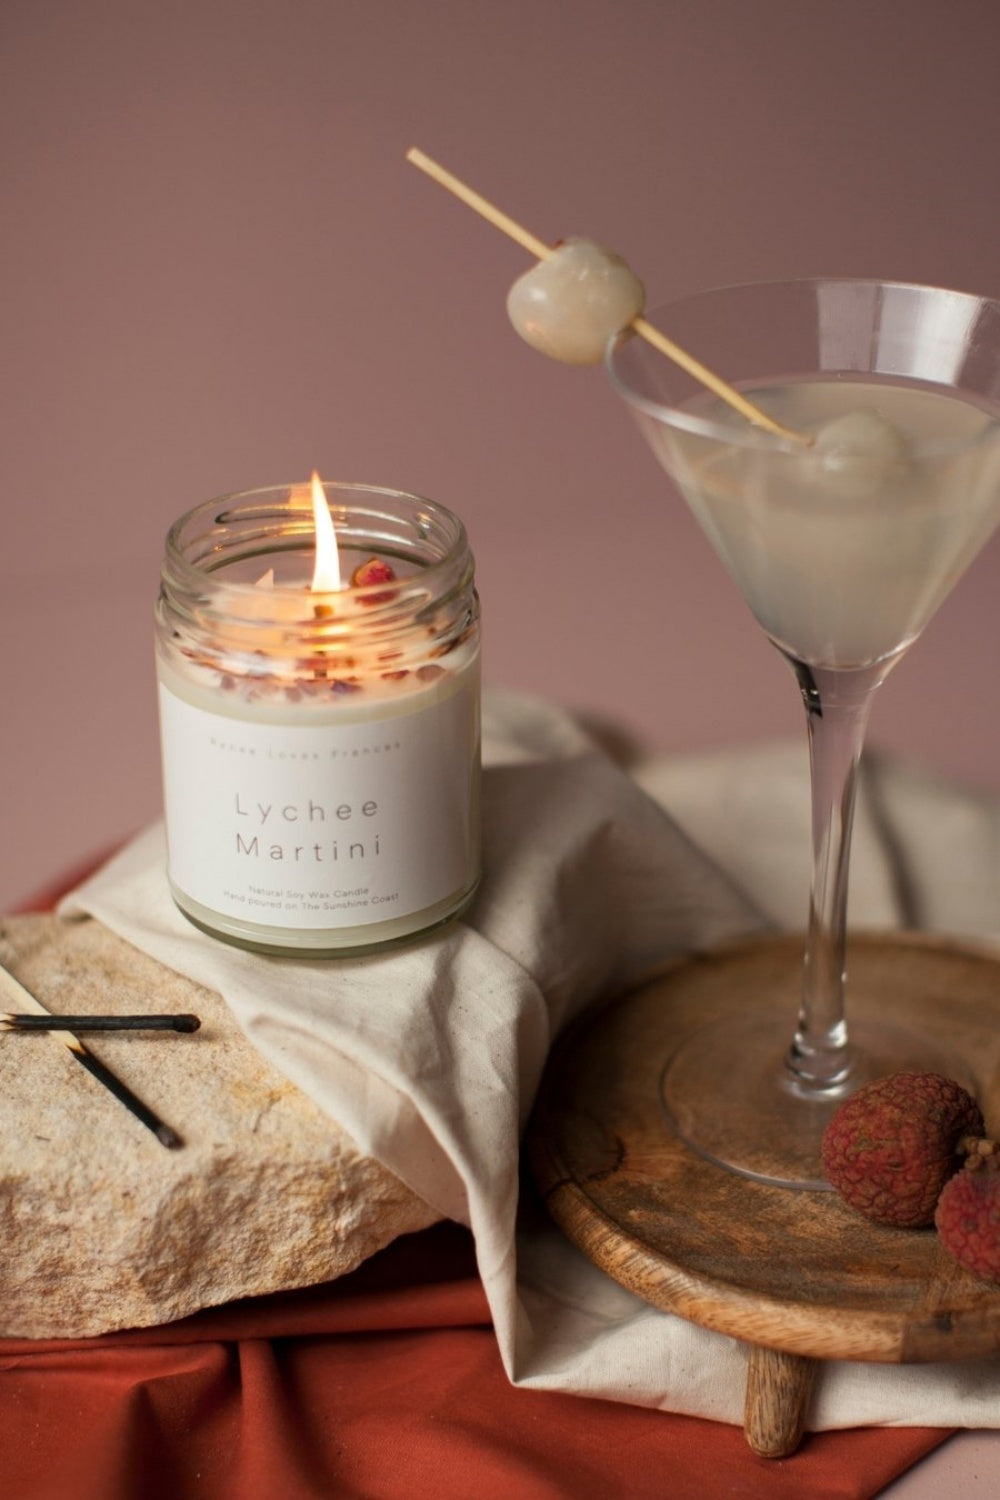 LYCHEE MARTINI CANDLE